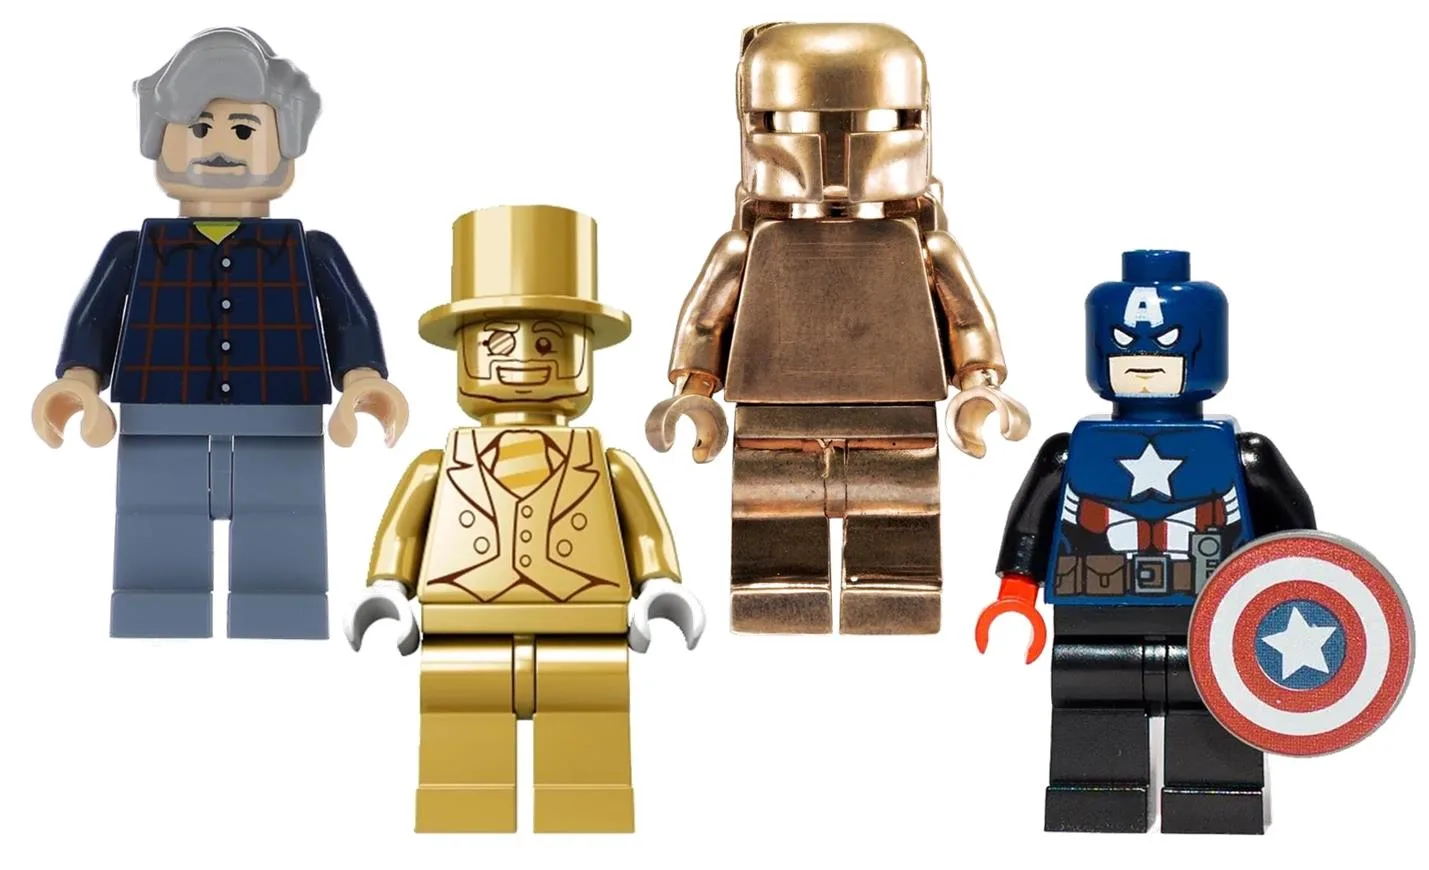 15 Rarest LEGO Minifigures Ever: Rarity Analysis and Current Prices (August 2022)